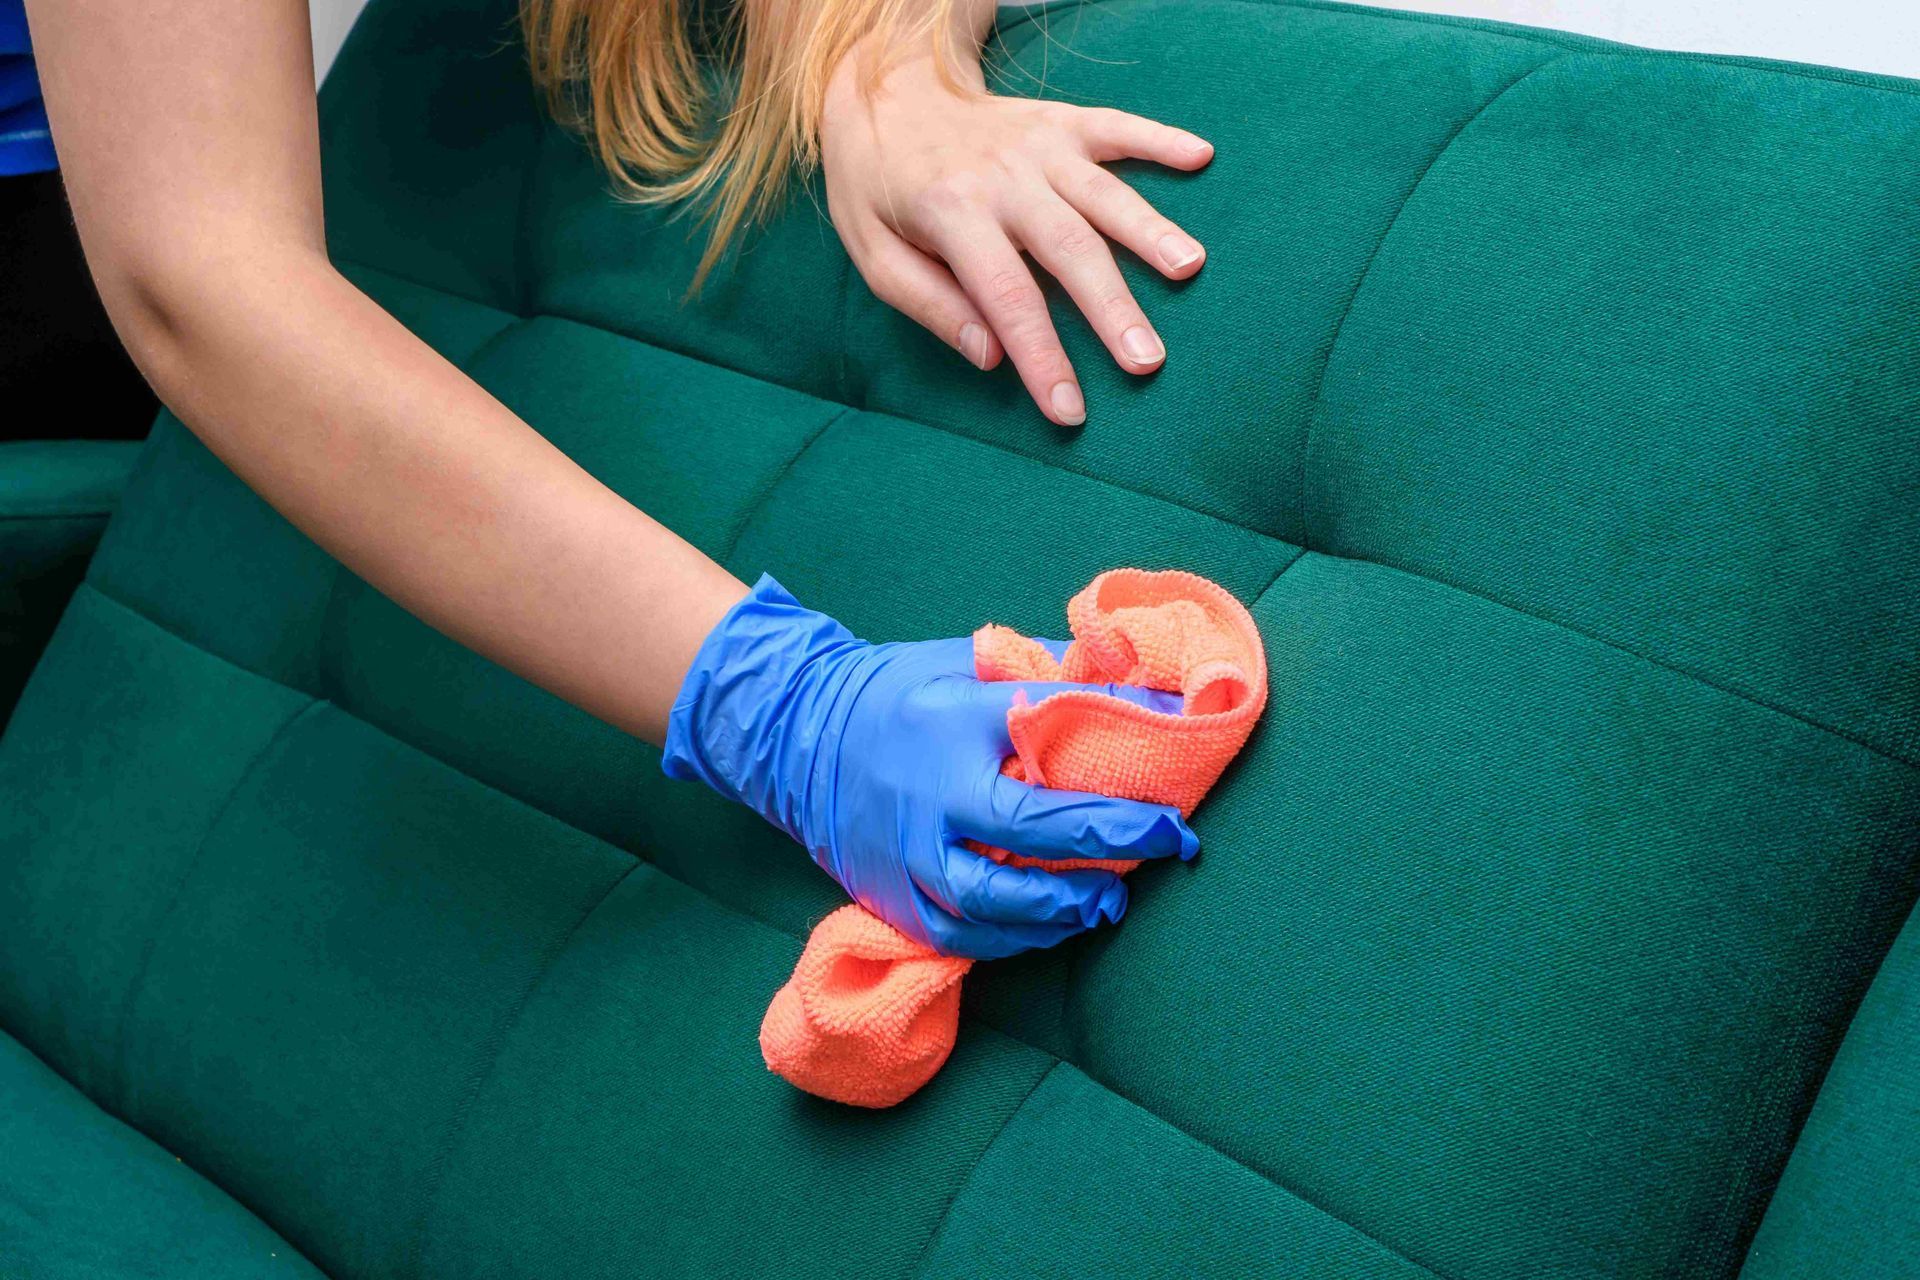 a woman is cleaning a green couch with a cloth